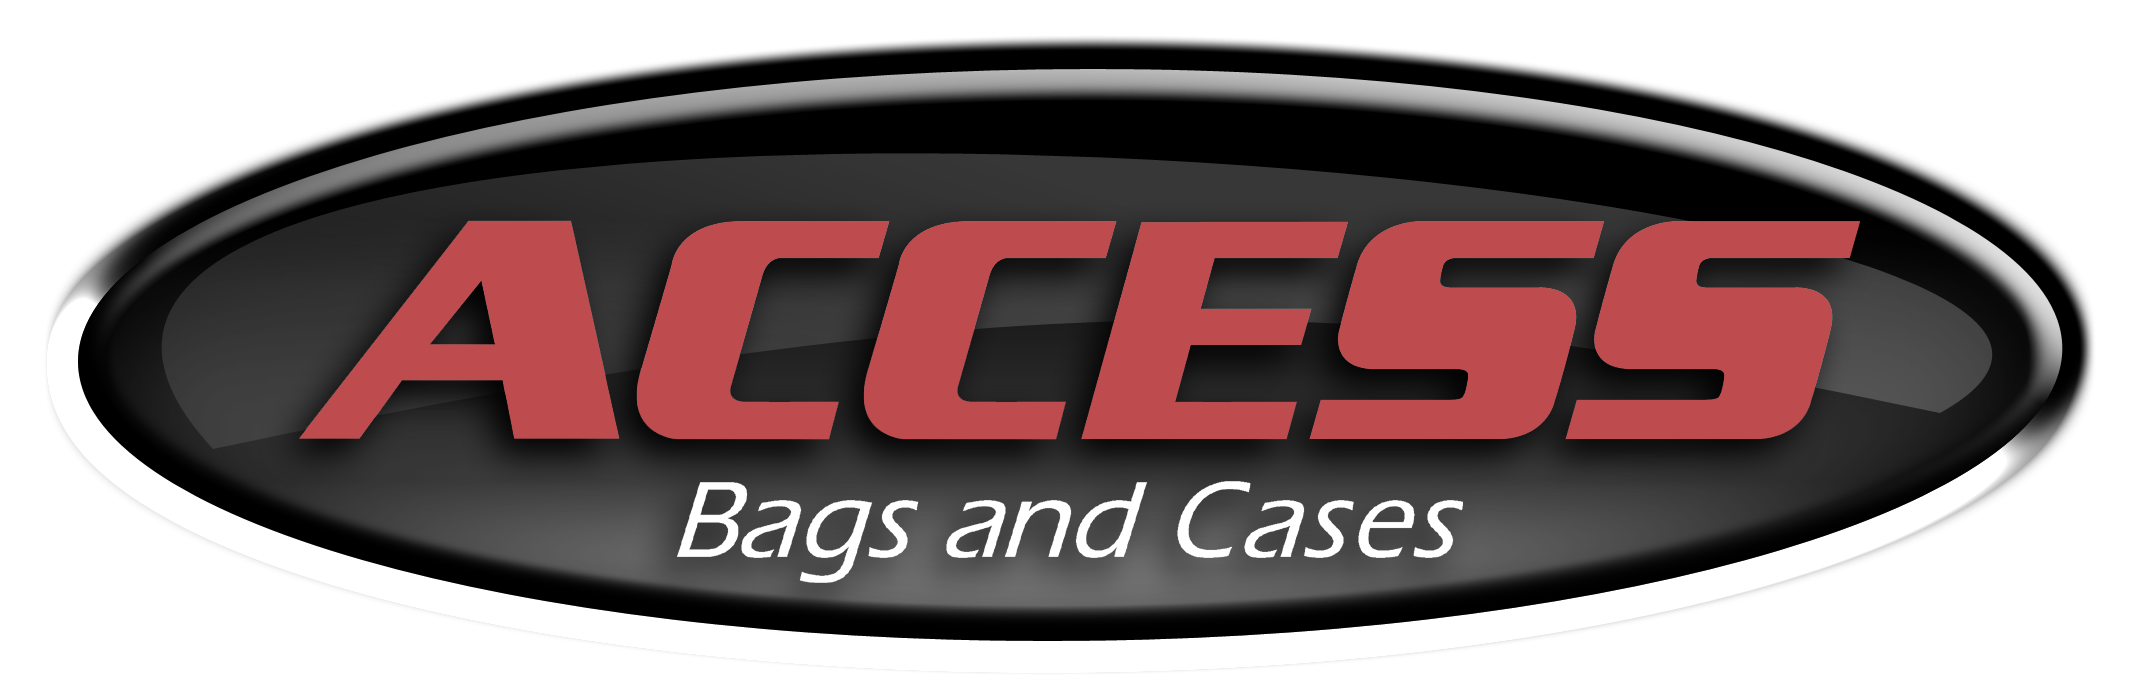 Jeff Black uses access bags and cases